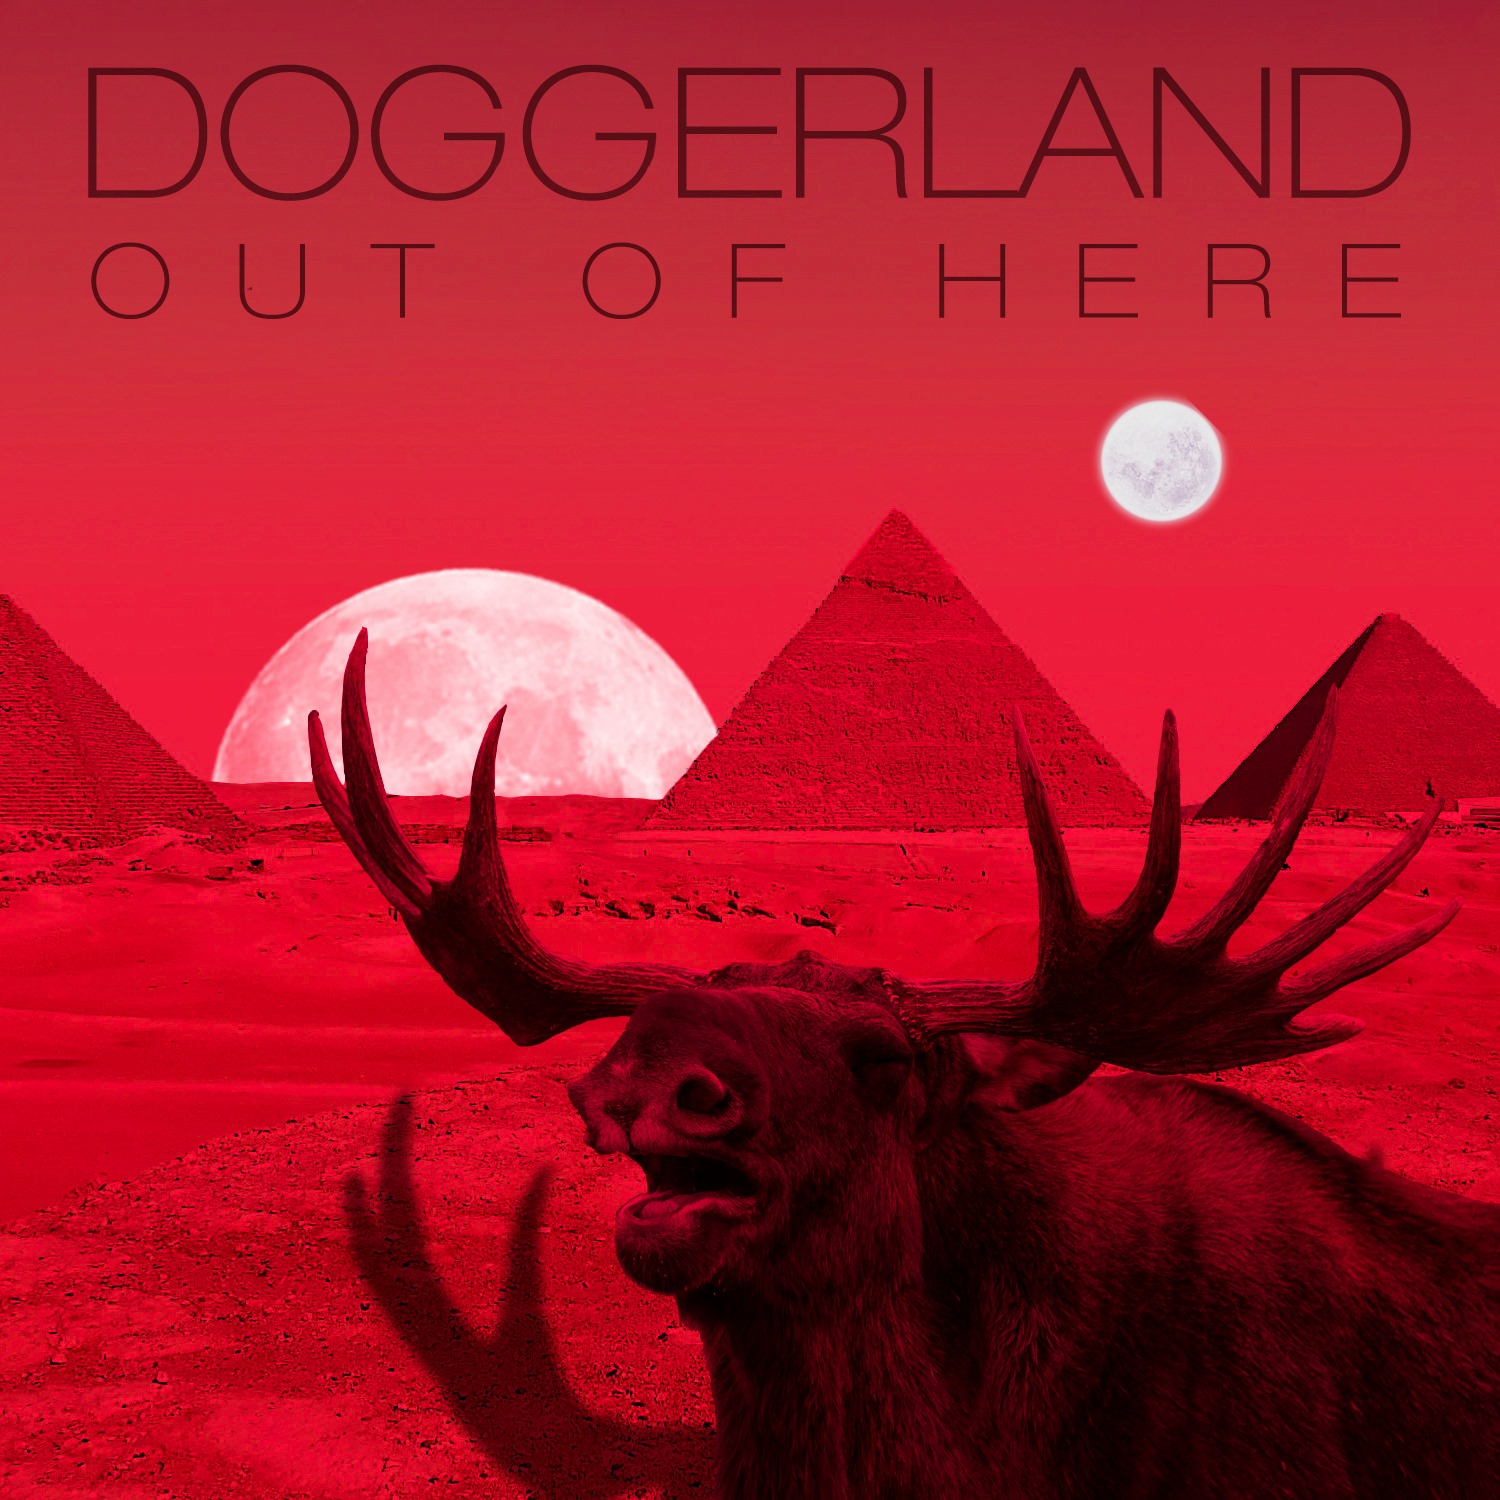 Norwegian rockers Doggerland are finally back – first single out